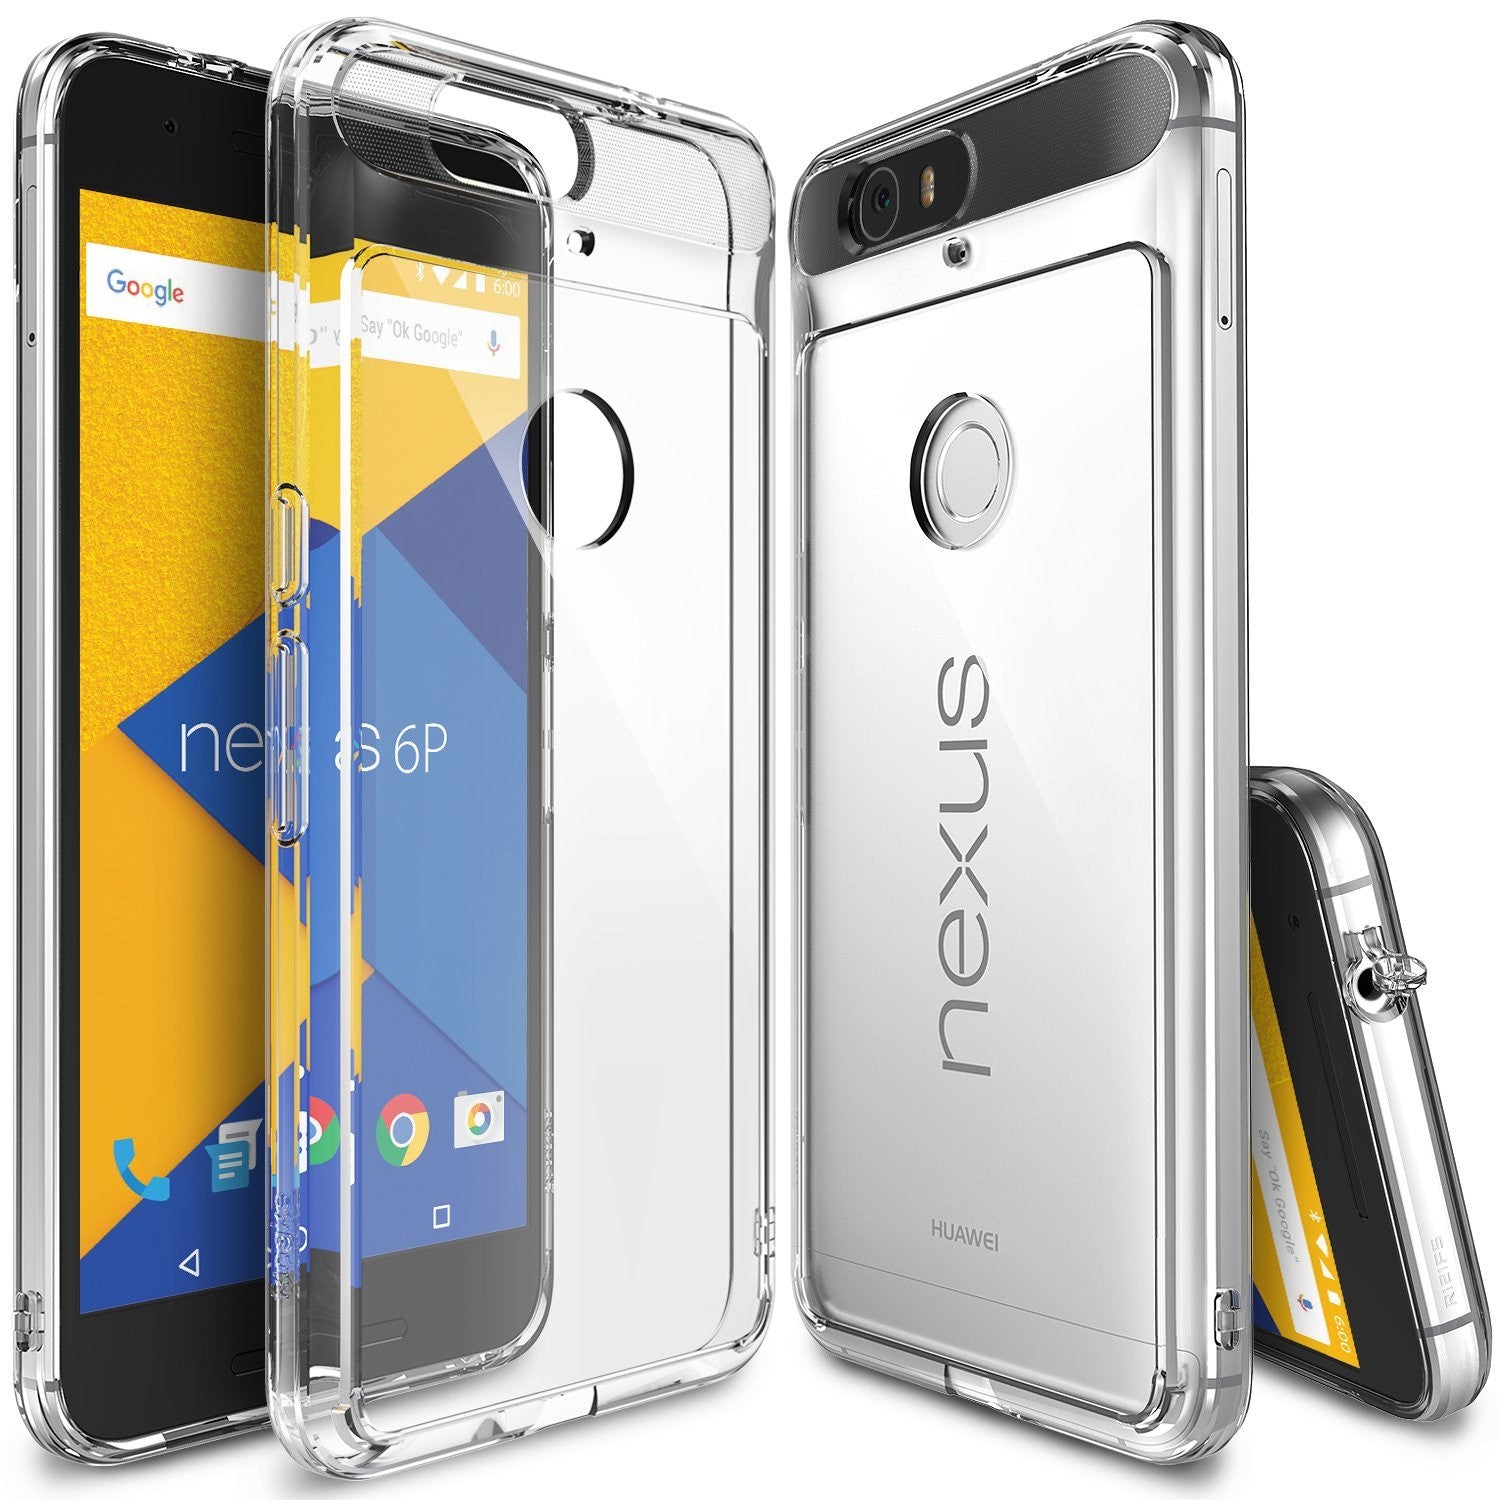 ringke fusion clear transparent hard back case cover for google nexus 6p main clear